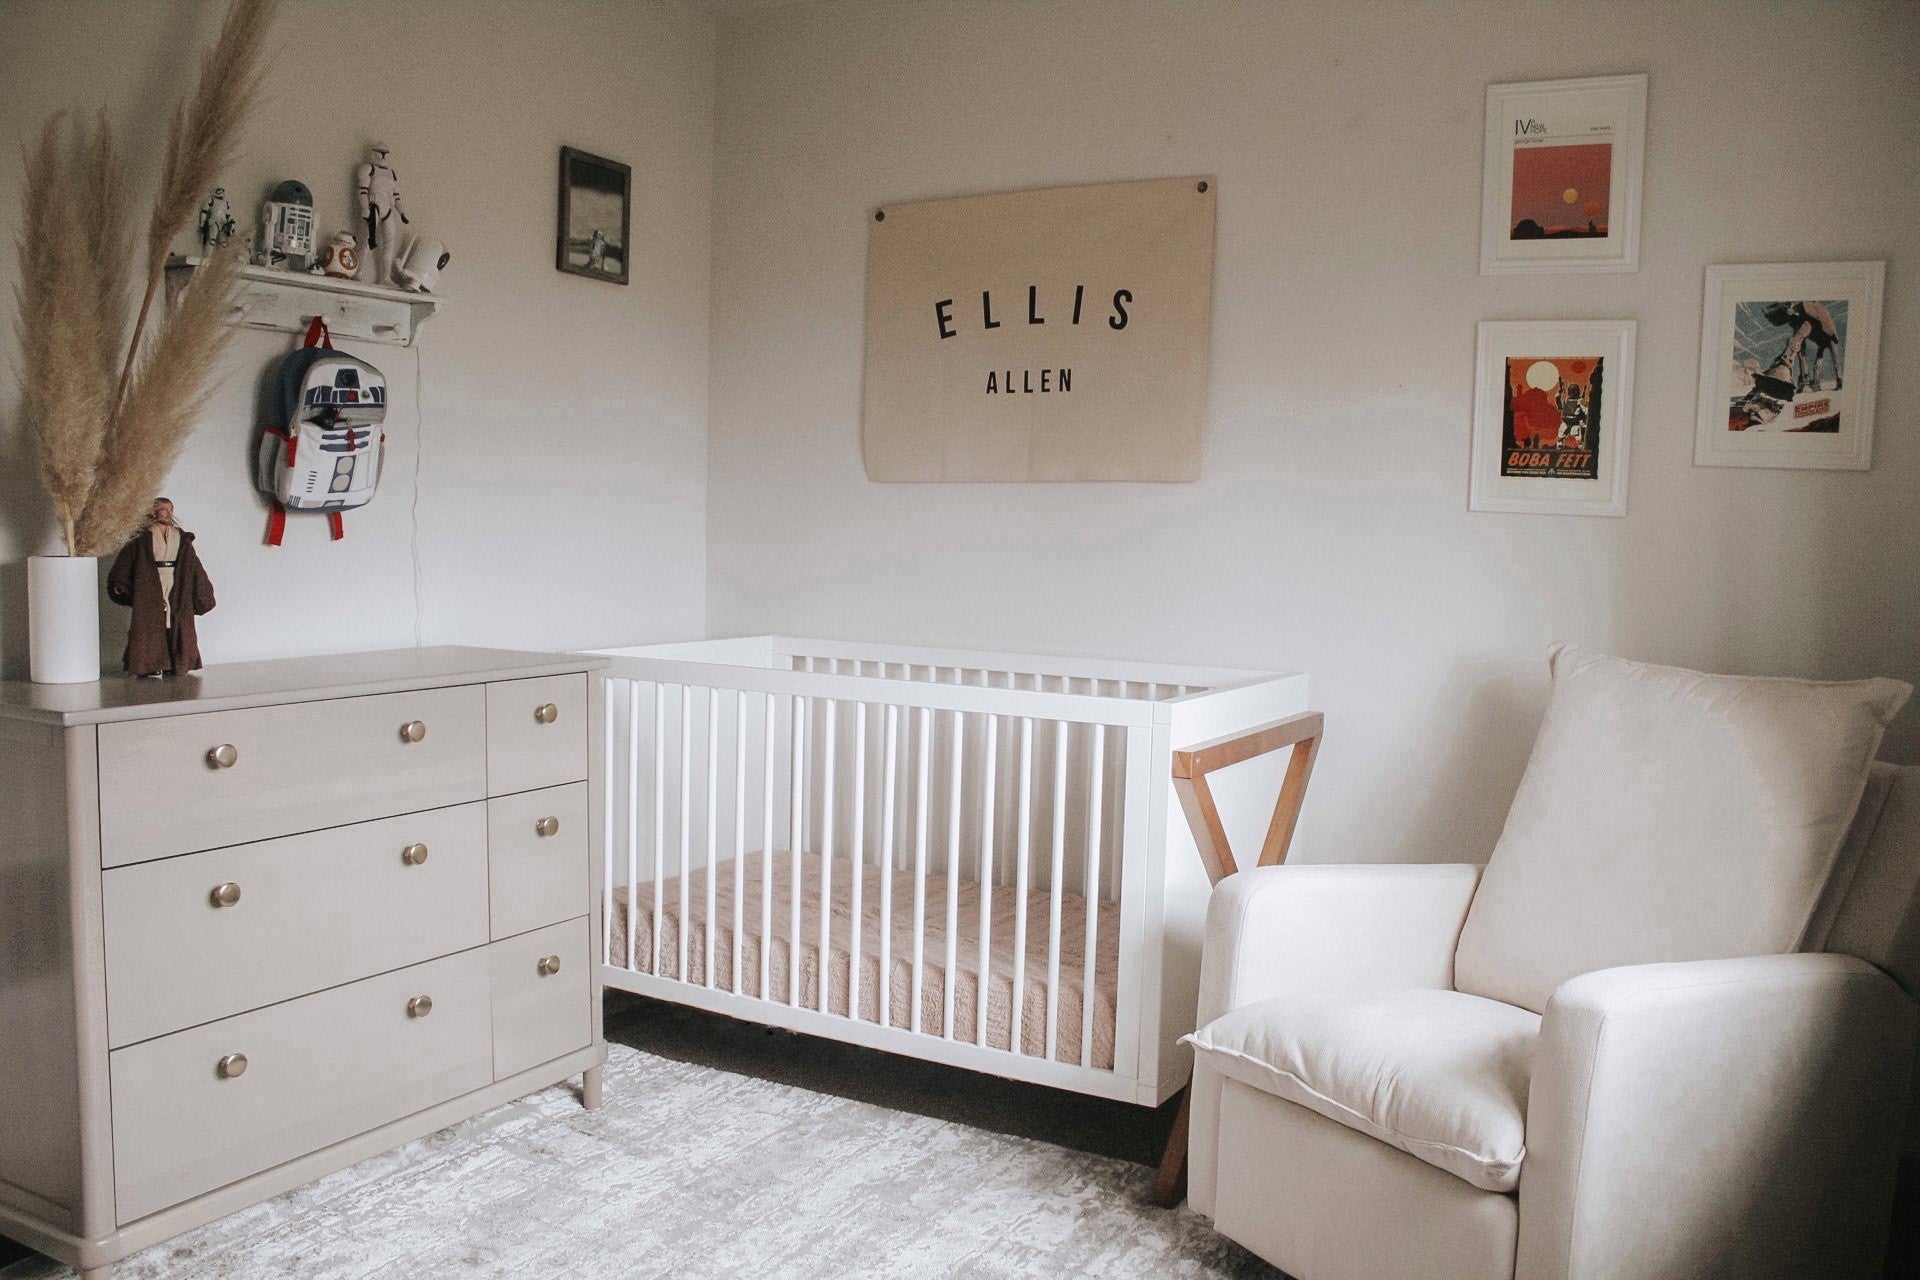 Nursery bedroom setting with beige dresser, white crib, and beige nursery chair. Room contains various decorative objects, with flag that reads Ellis Allen.